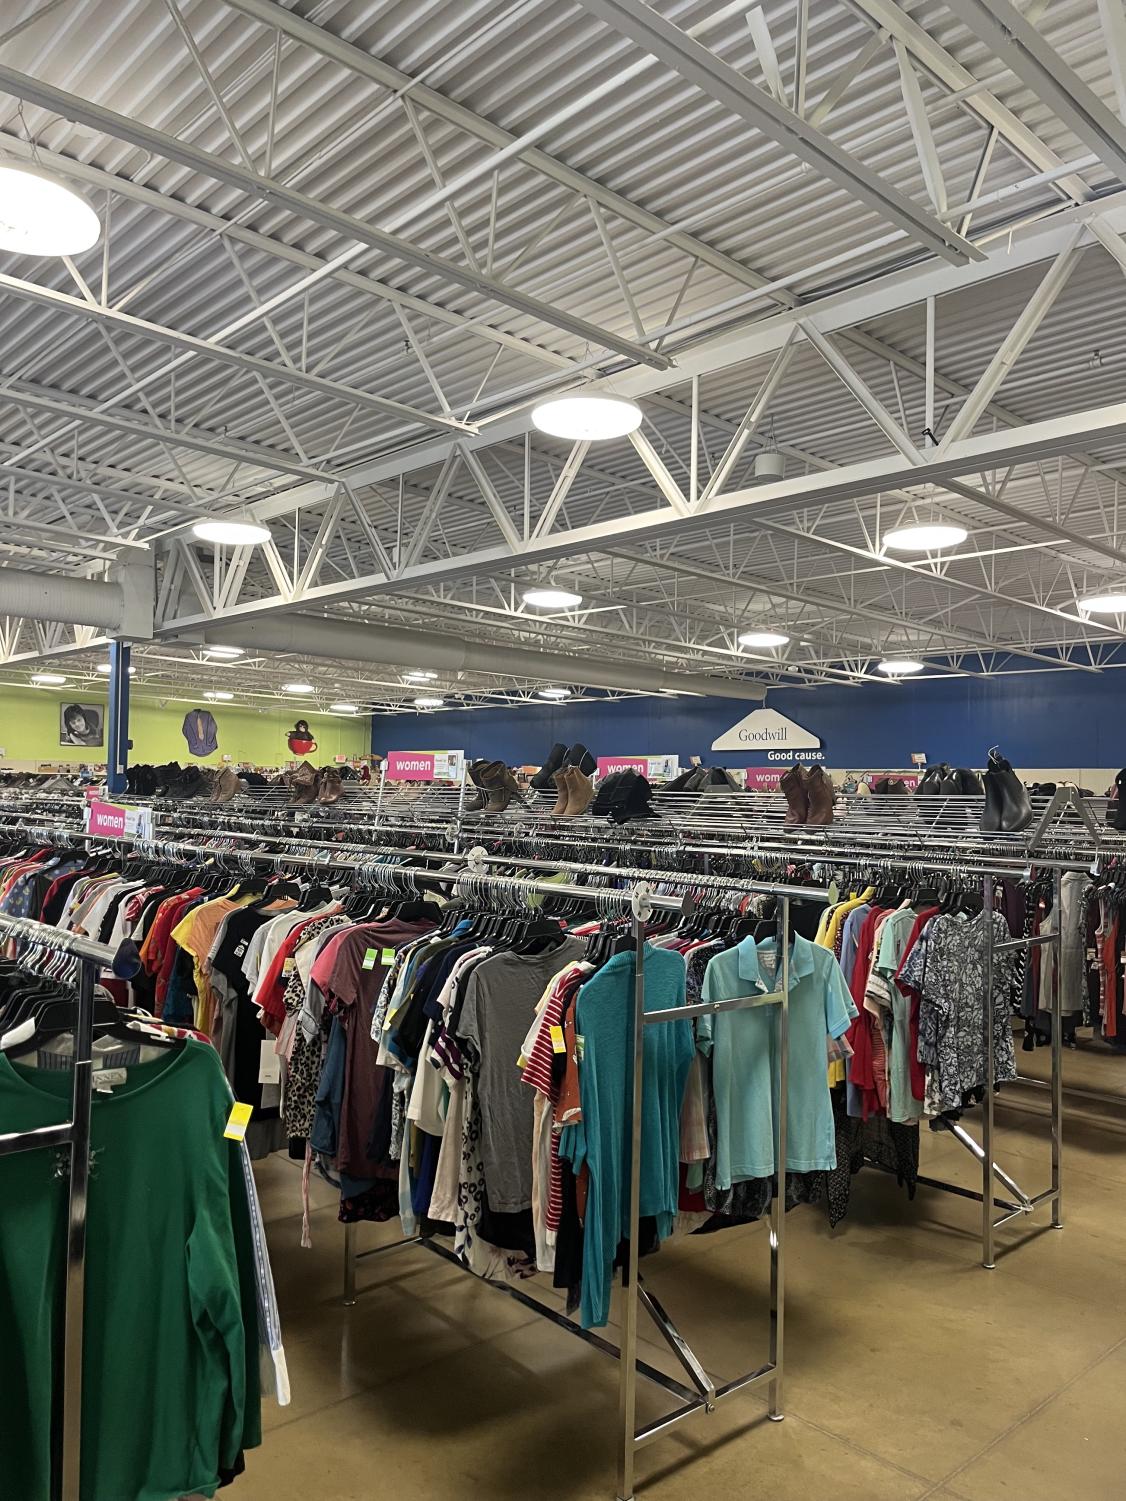 Thrift stores such as Goodwill carry donated clothes from various decades. Consumers are able to buy the clothes at a significantly lower price compared to retail.